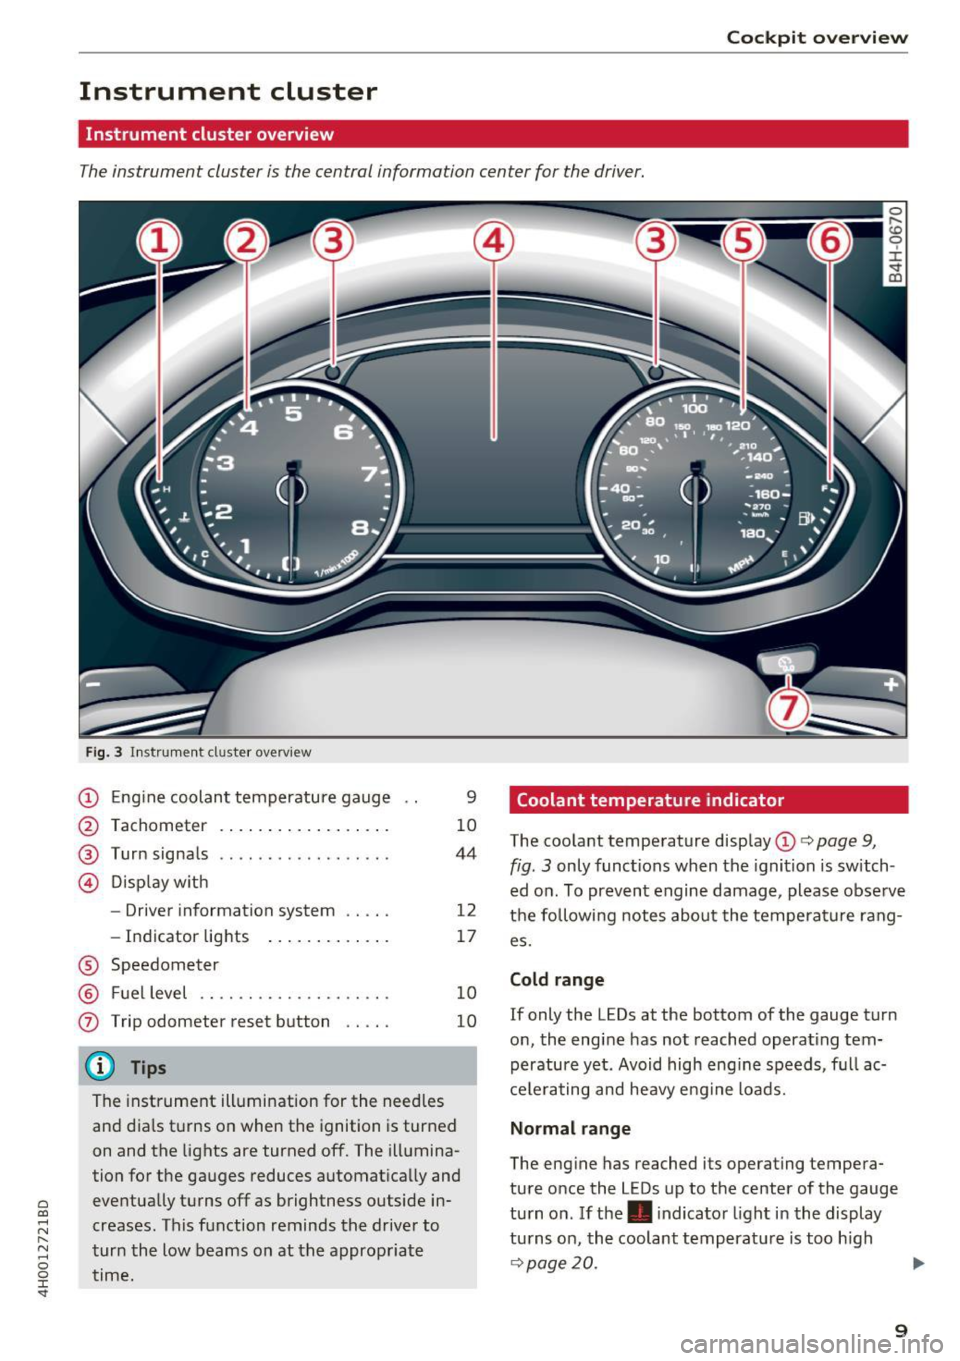 AUDI A8 2017  Owners Manual C) C0 .... 
" ,.... 
" .... 0 0 :r <t 
Cockpit  overview 
Instrument  cluster 
Instrument  cluster  overview 
The instrument  cluster  is the  central  information  center  for the driver. 
Fig. 3 I